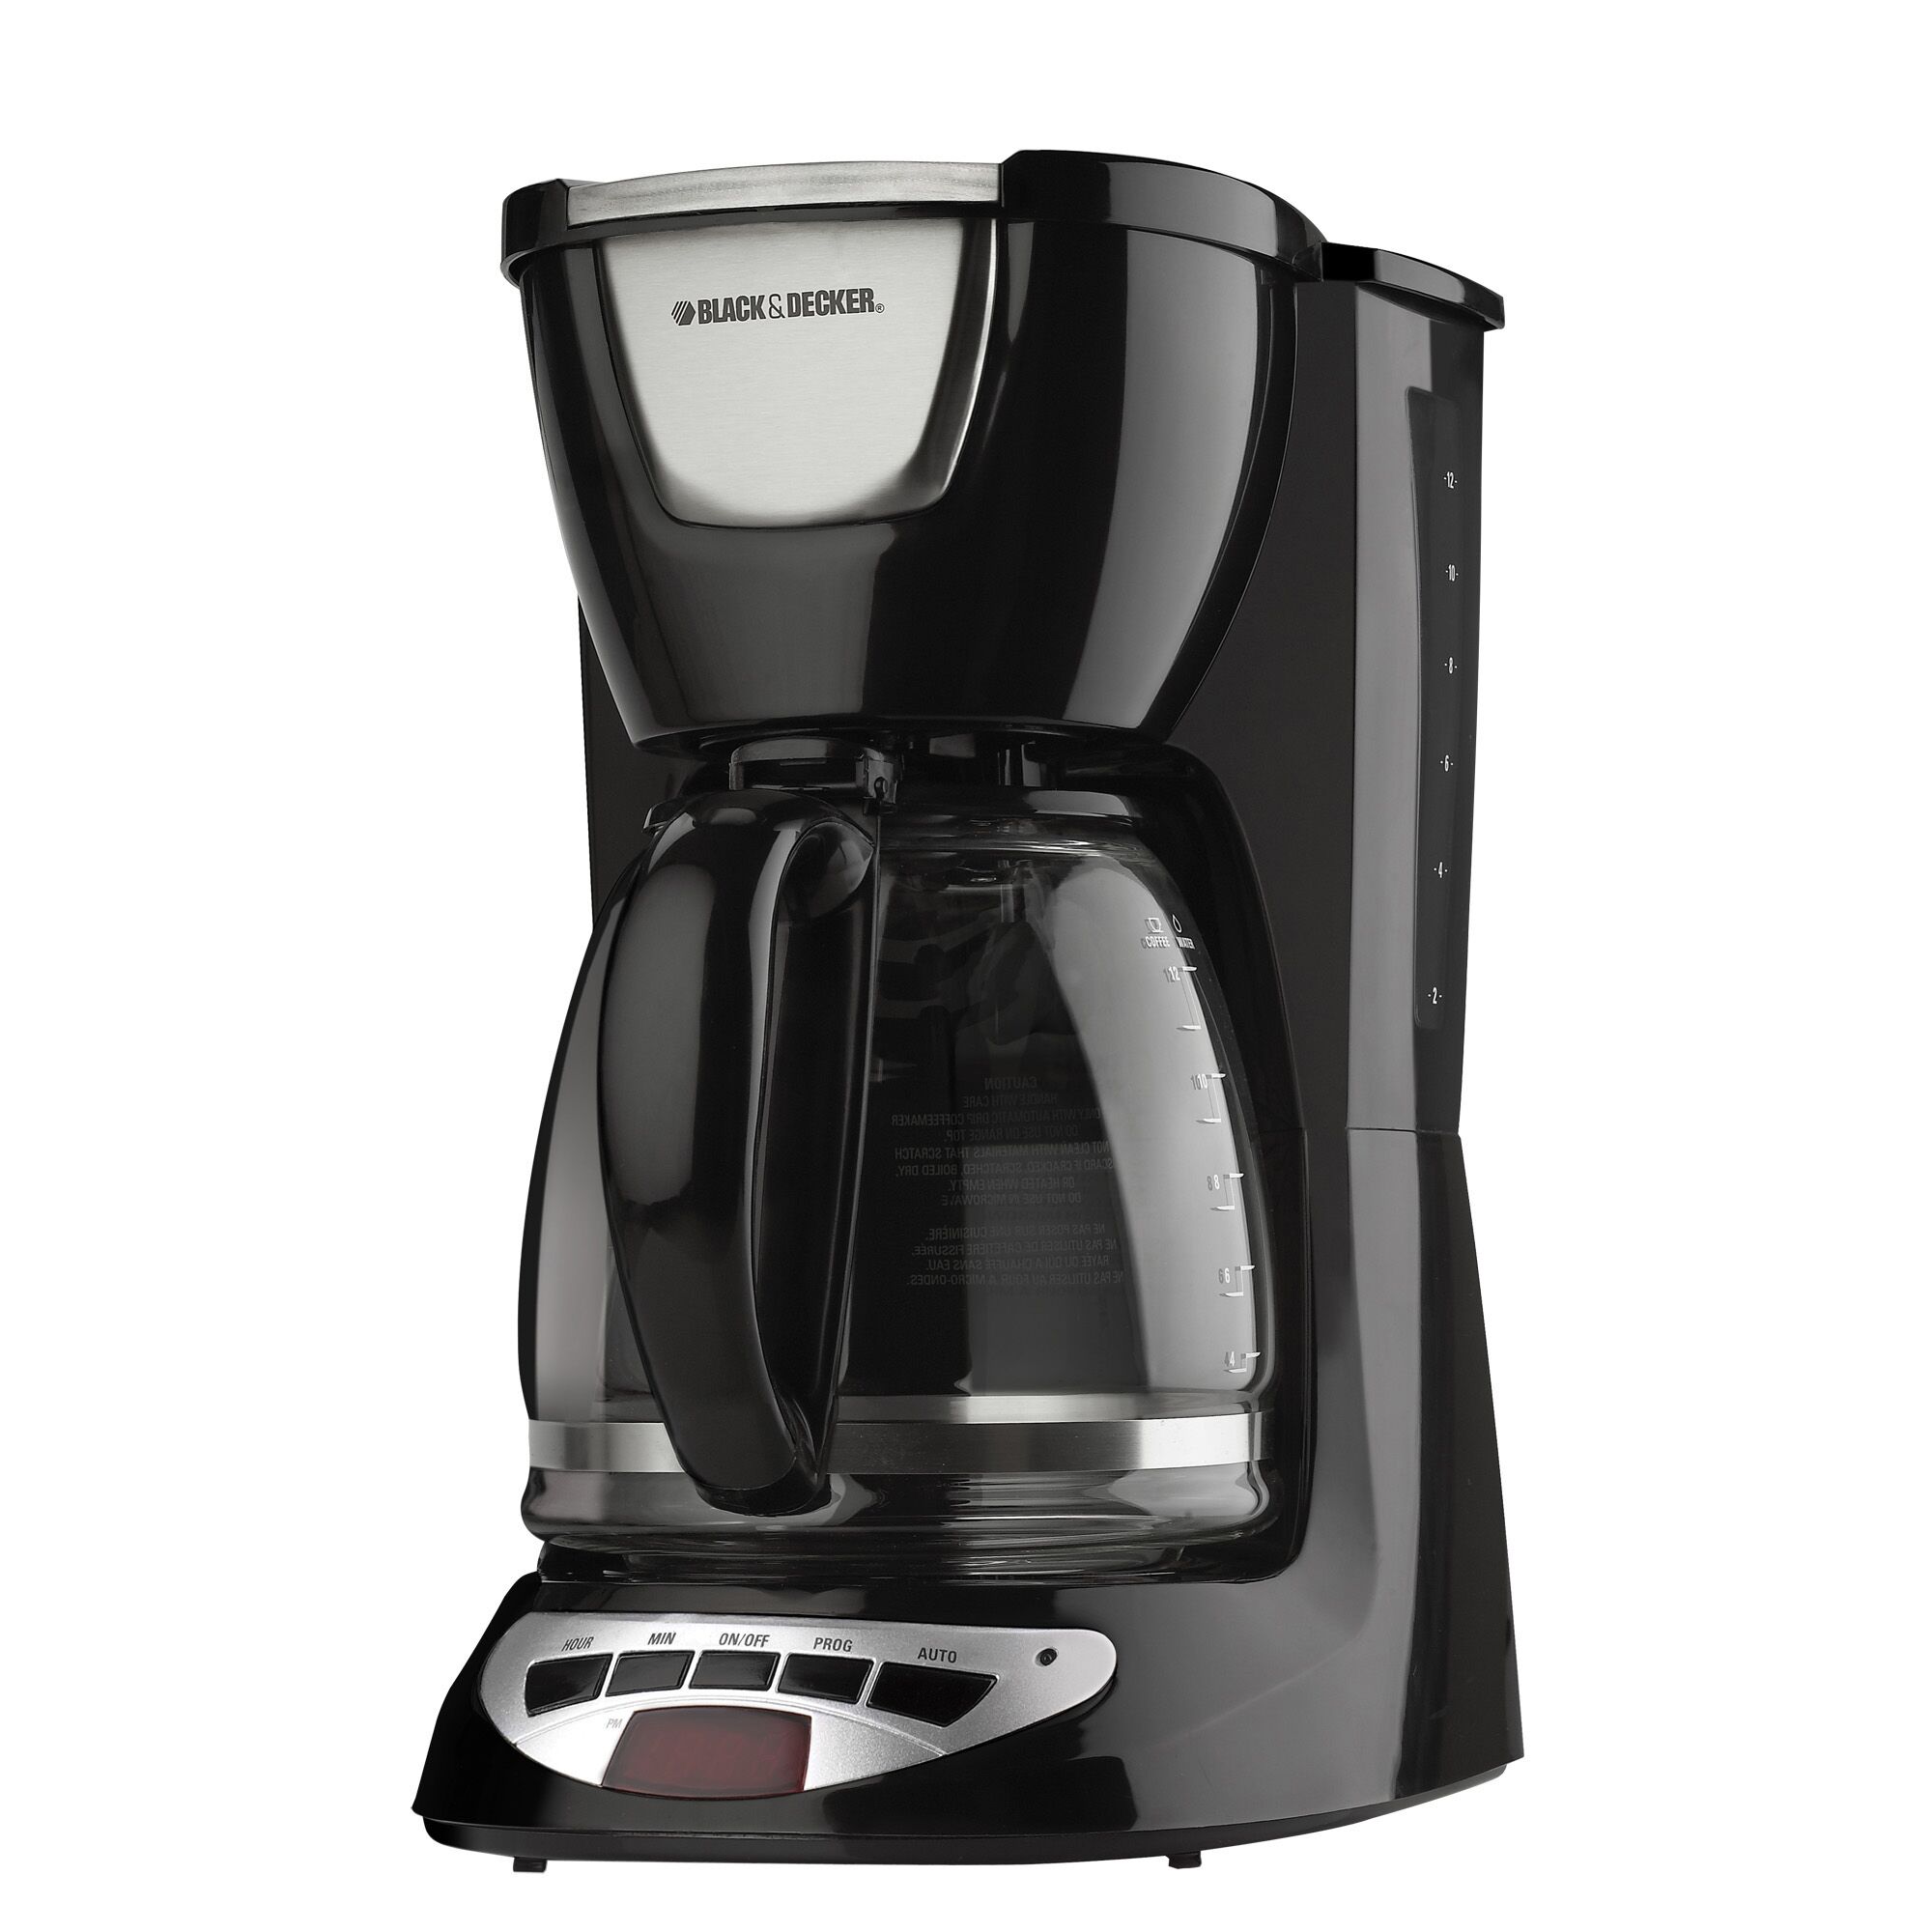 12 Cup programmable coffee maker.